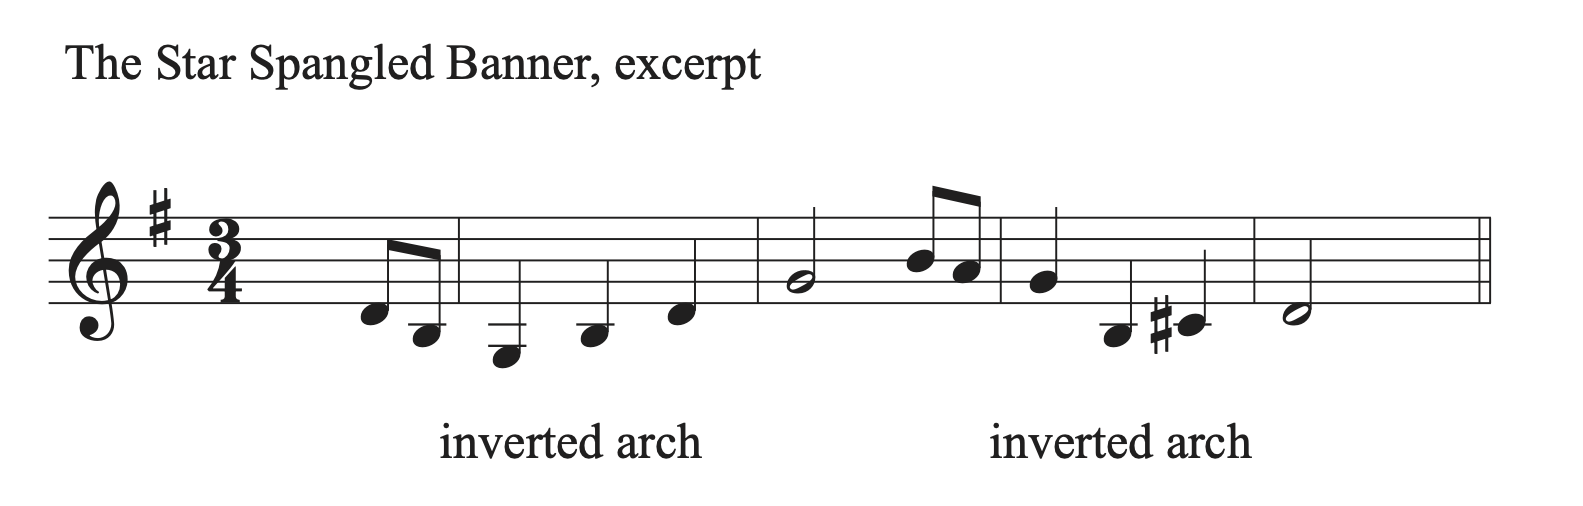 Excerpt from the Star Spangled Banner with inverted arch shapes labeled.